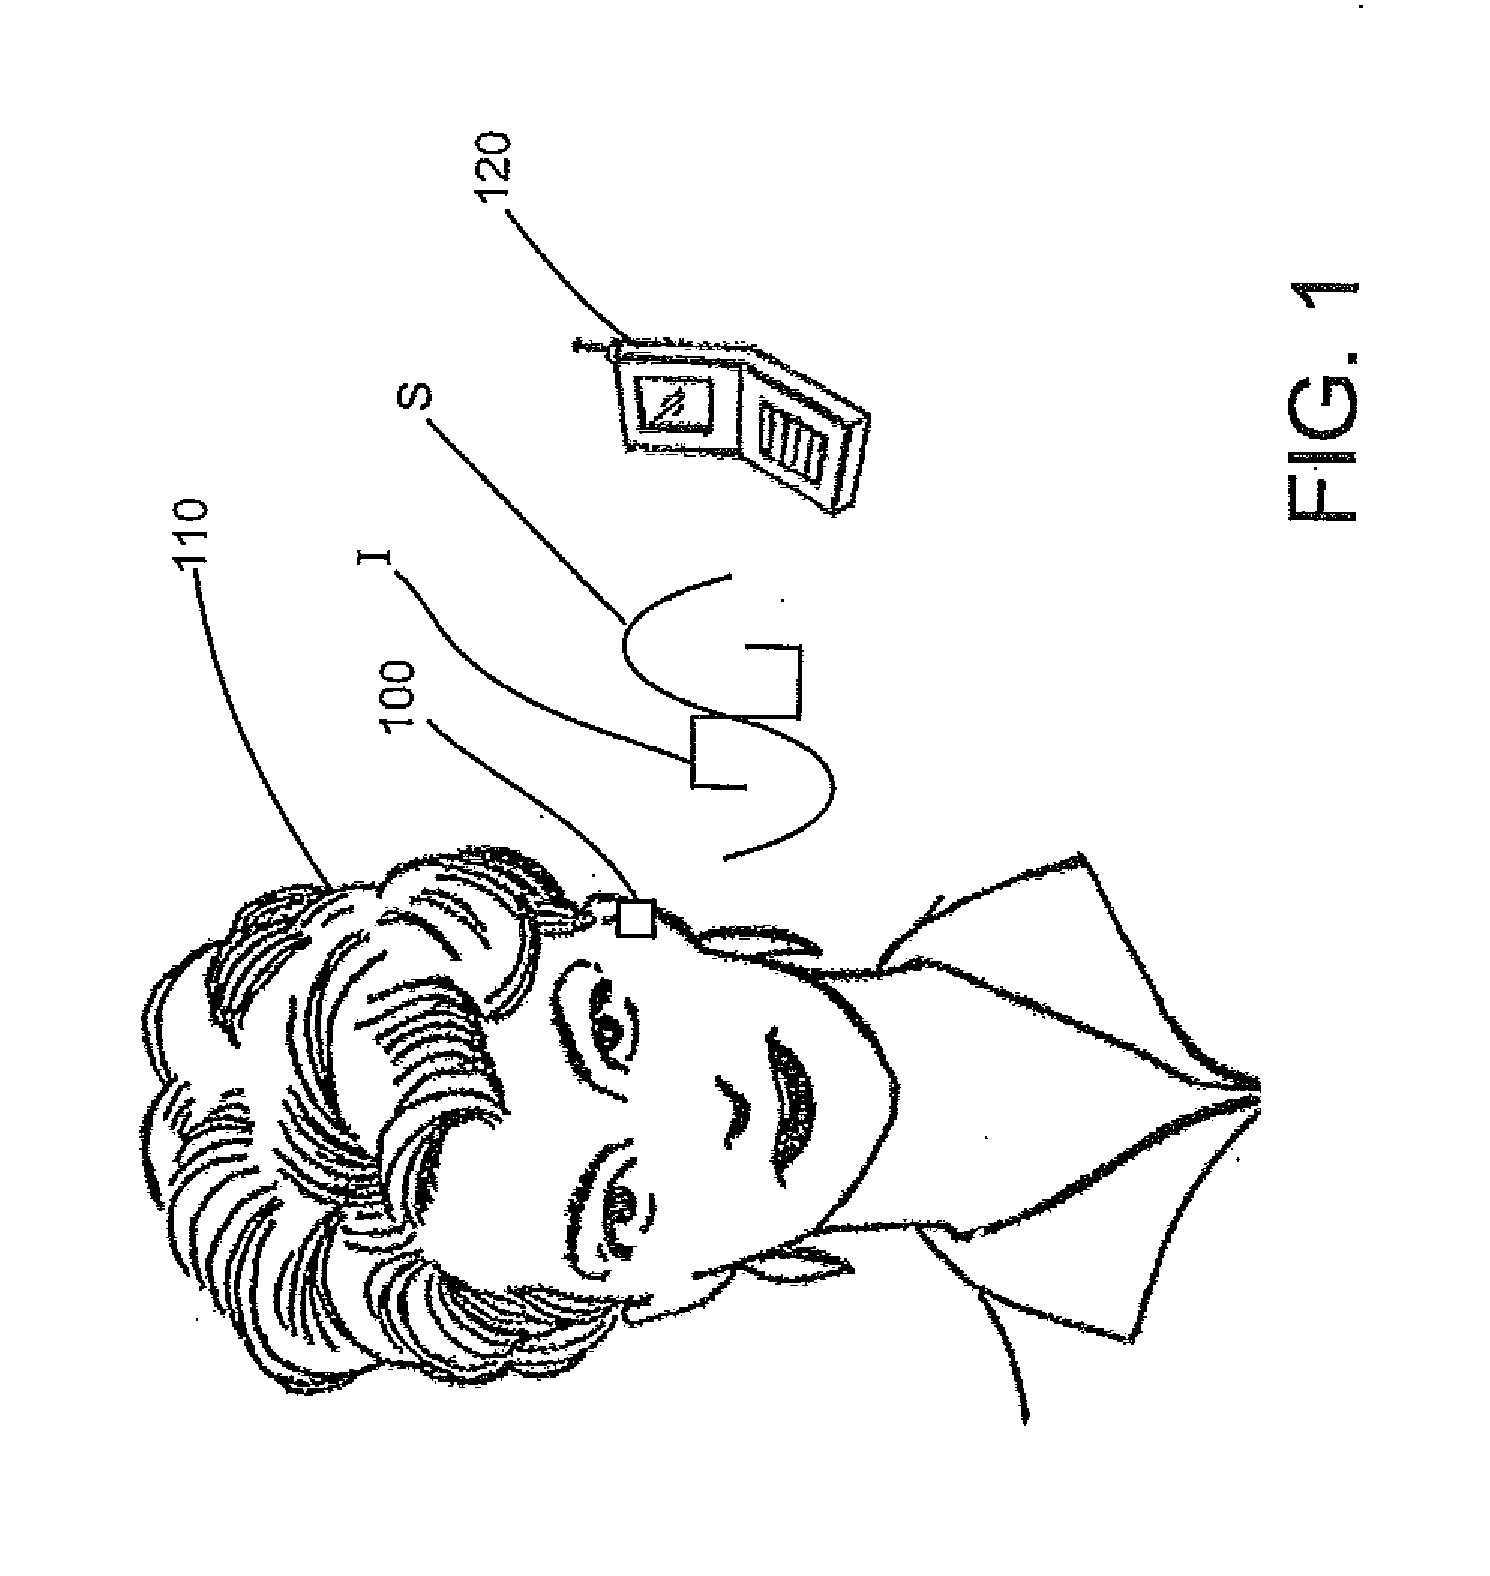 Active Cancellation Hearing Assistance Device